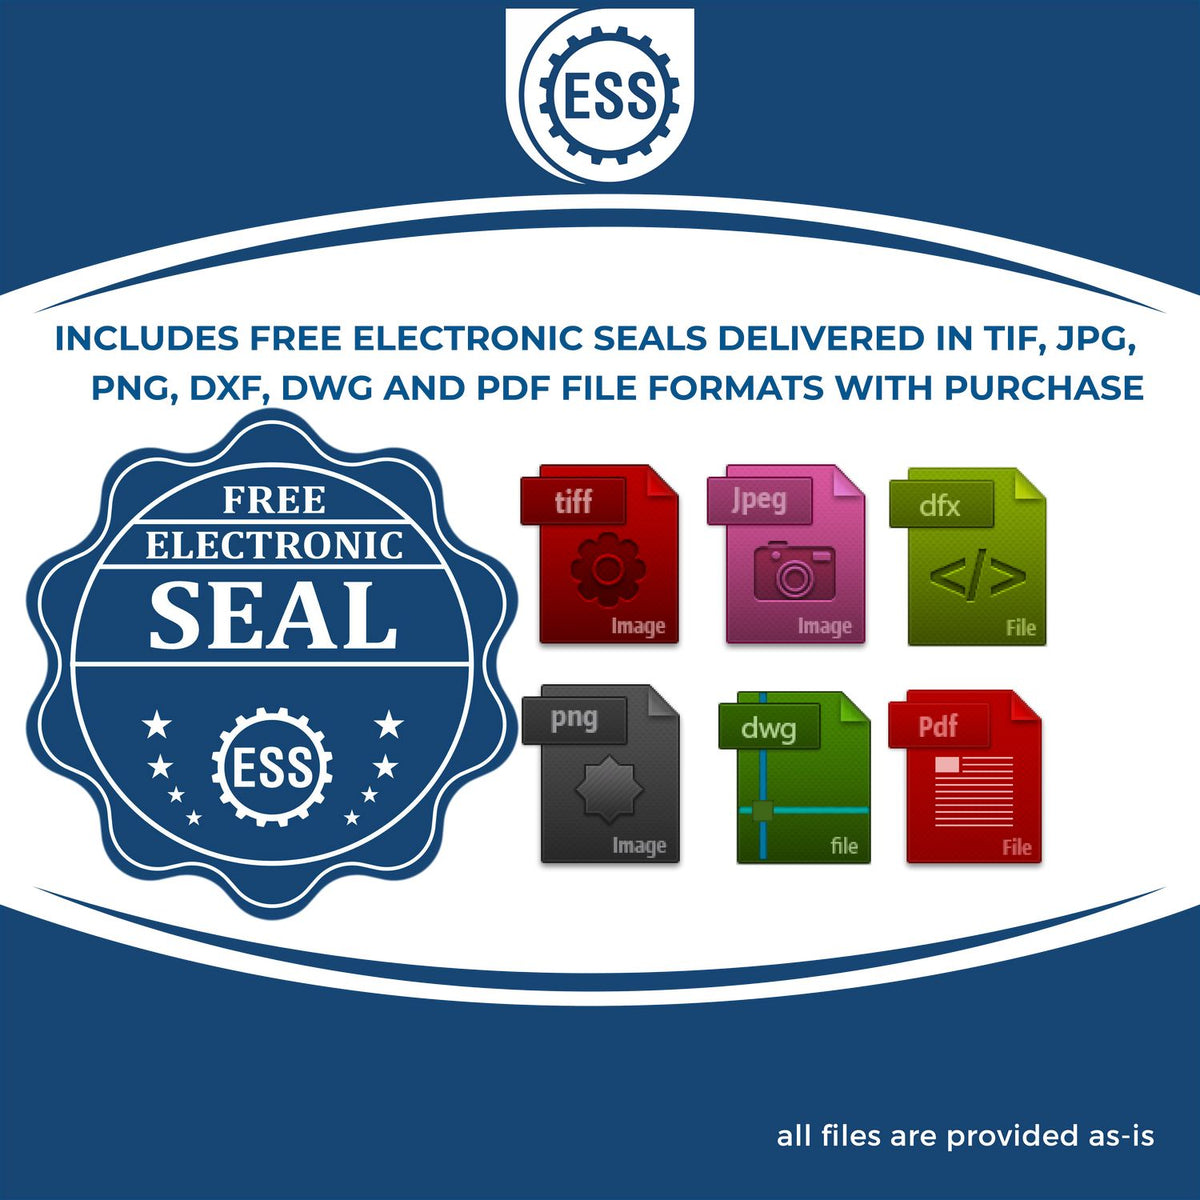 An infographic for the free electronic seal for the Heavy Duty Cast Iron Hawaii Land Surveyor Seal Embosser illustrating the different file type icons such as DXF, DWG, TIF, JPG and PNG.